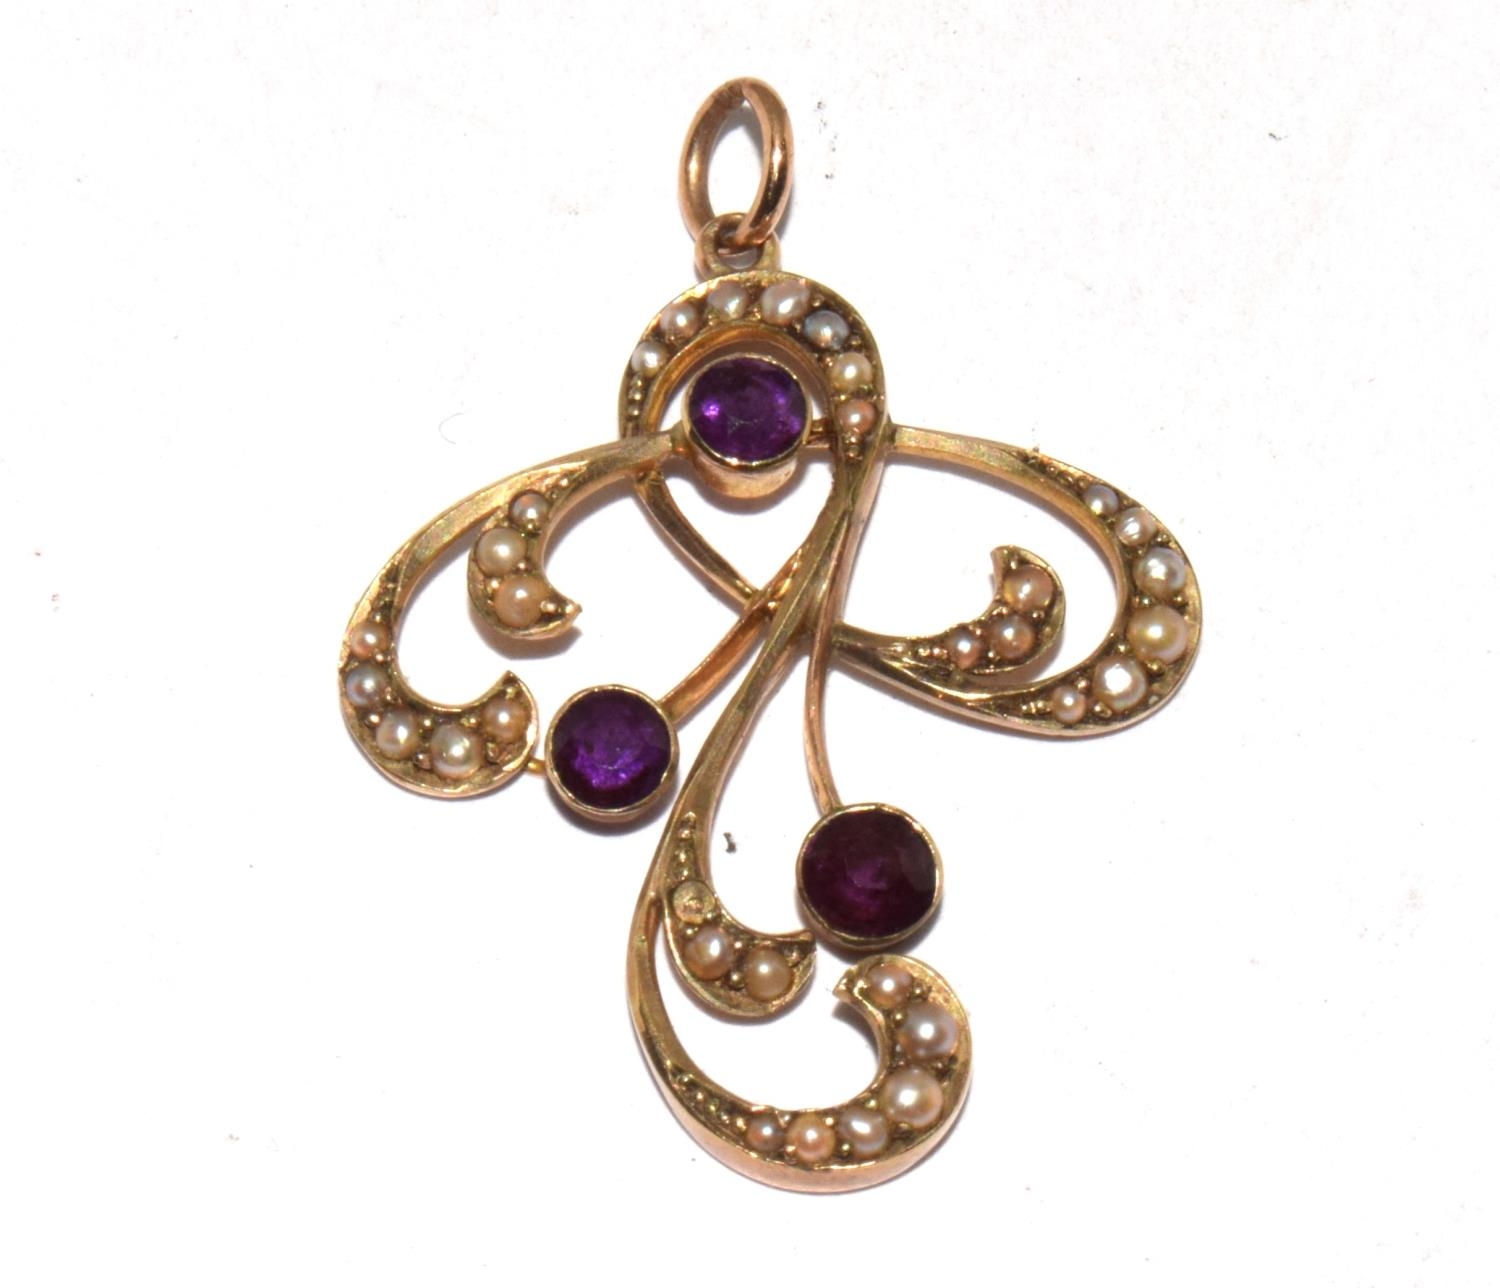 9ct gold vintage Belle Epoque pendant set with Amethyst and Pearls